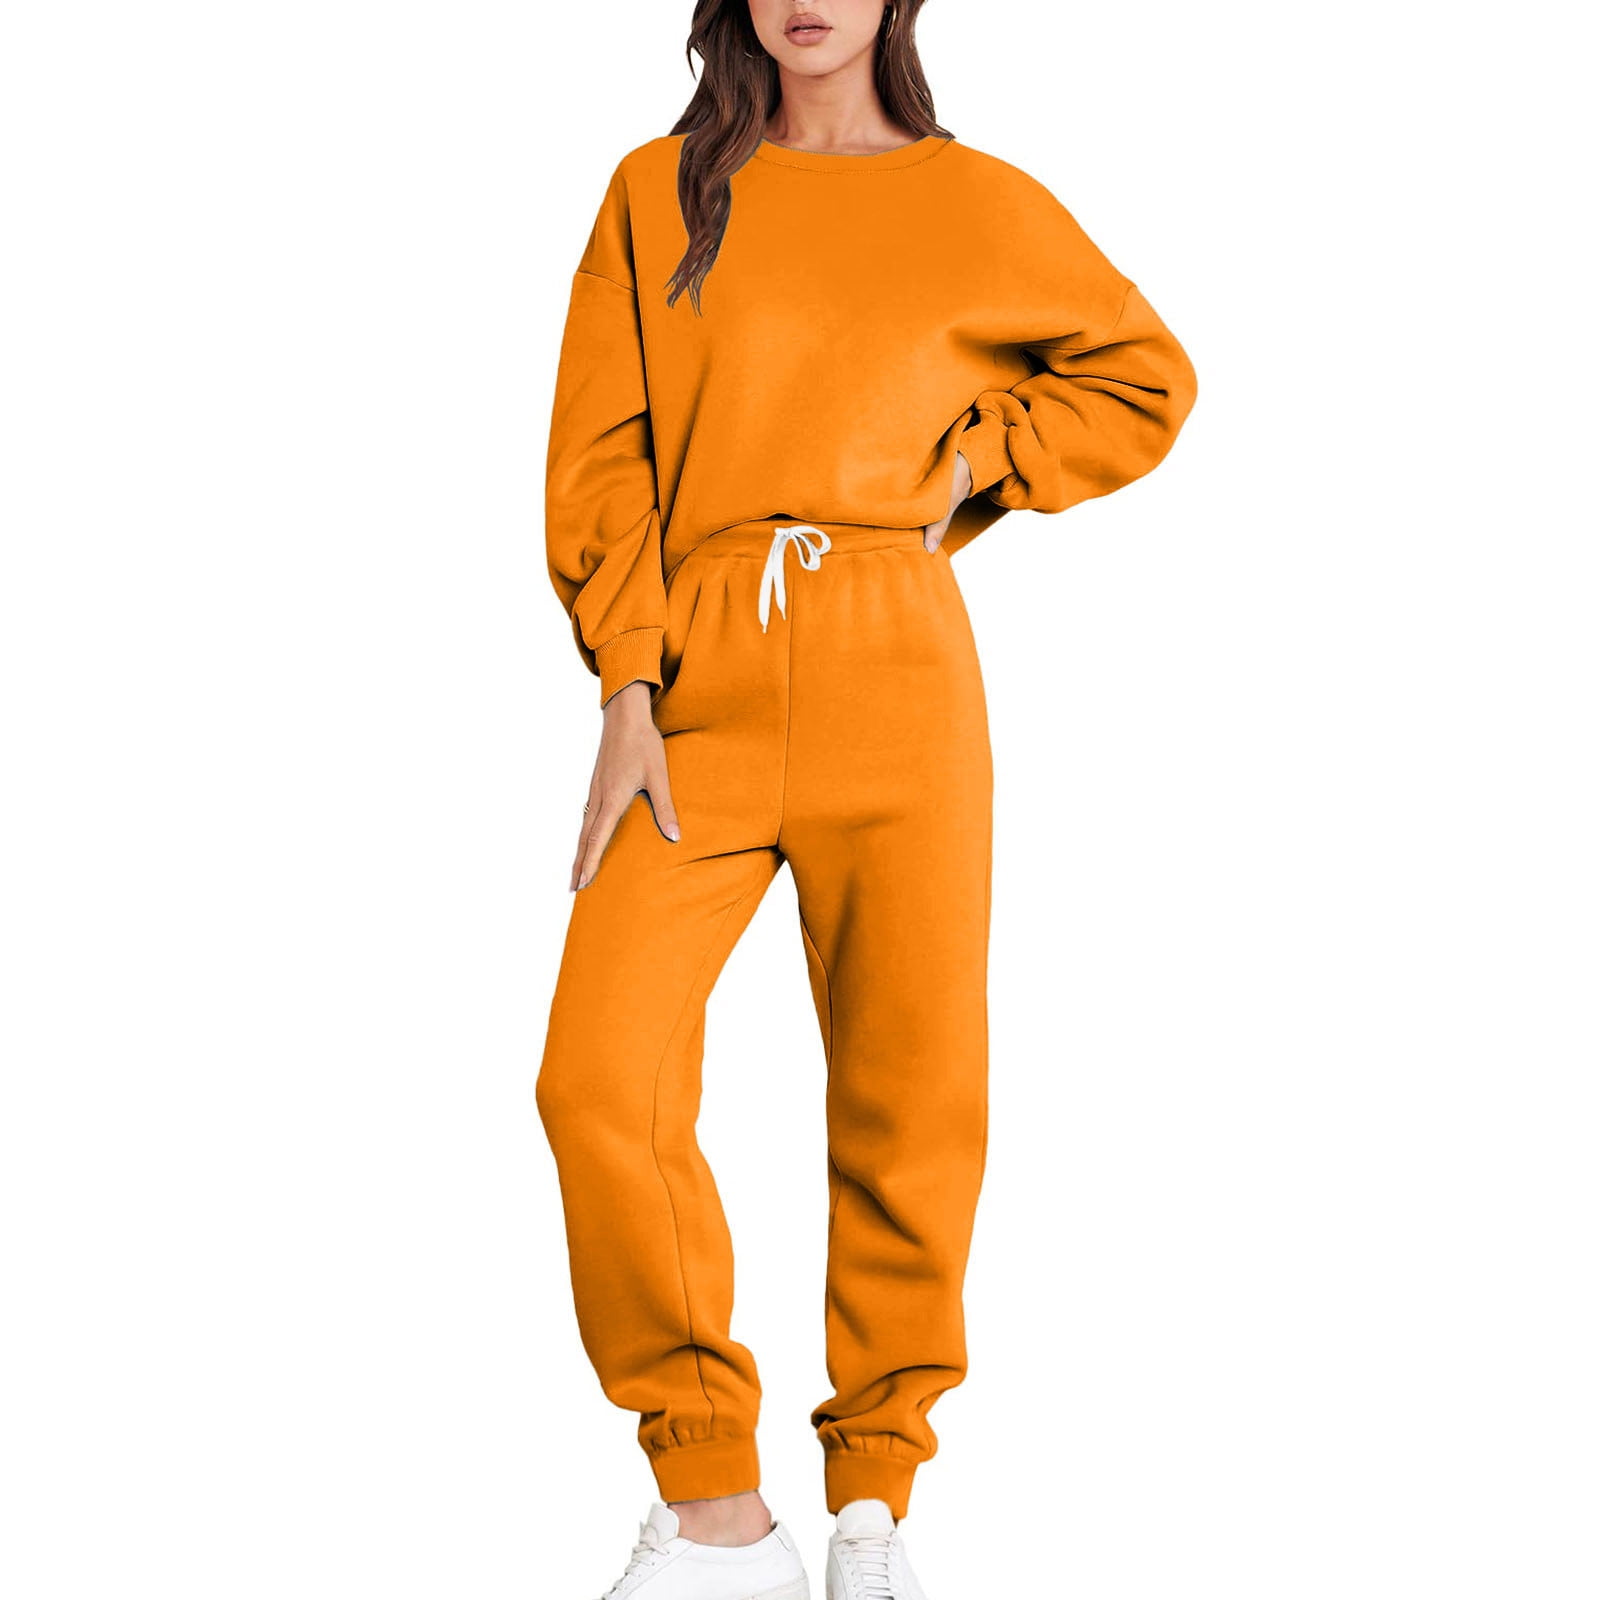 FAIWAD Suit for Womens Plus Size Solid Color Sweatsuit Long Sleeve Hooded  Pullover with Pockets Sweatpants Sets (Small, Pink)